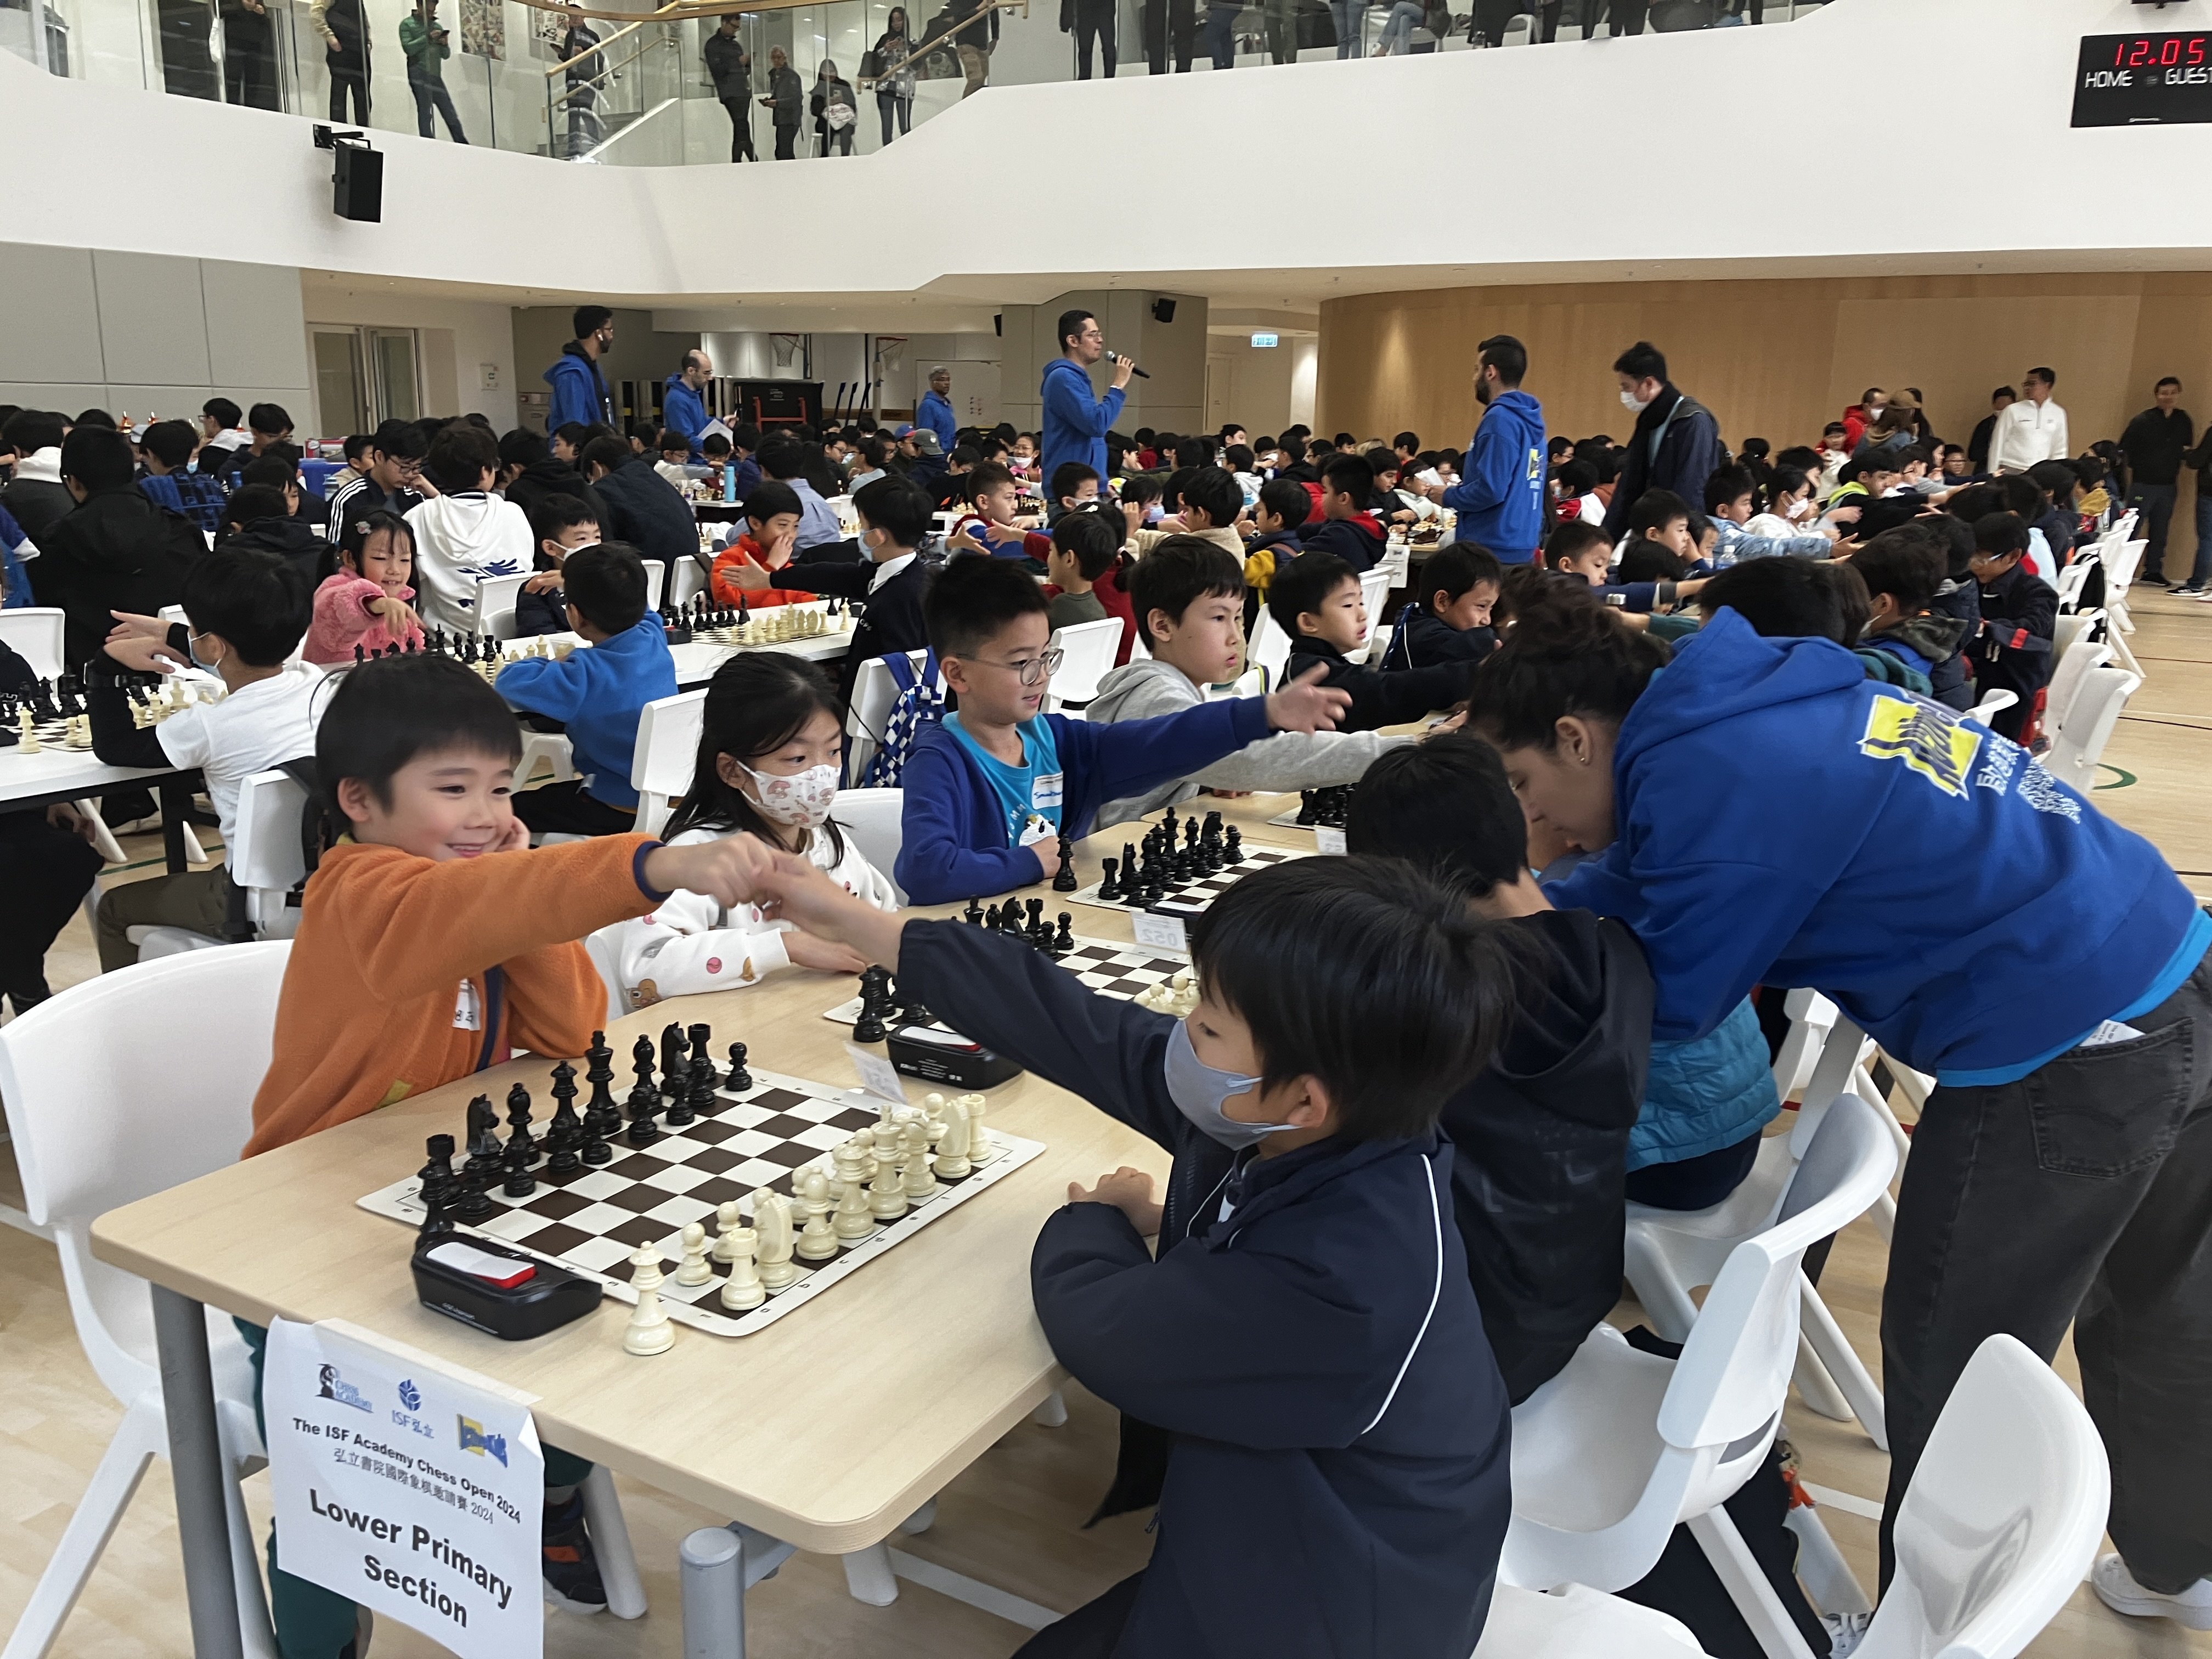 More than 200 students competed in the annual ISF Academy Chess Open. Photo: Handout